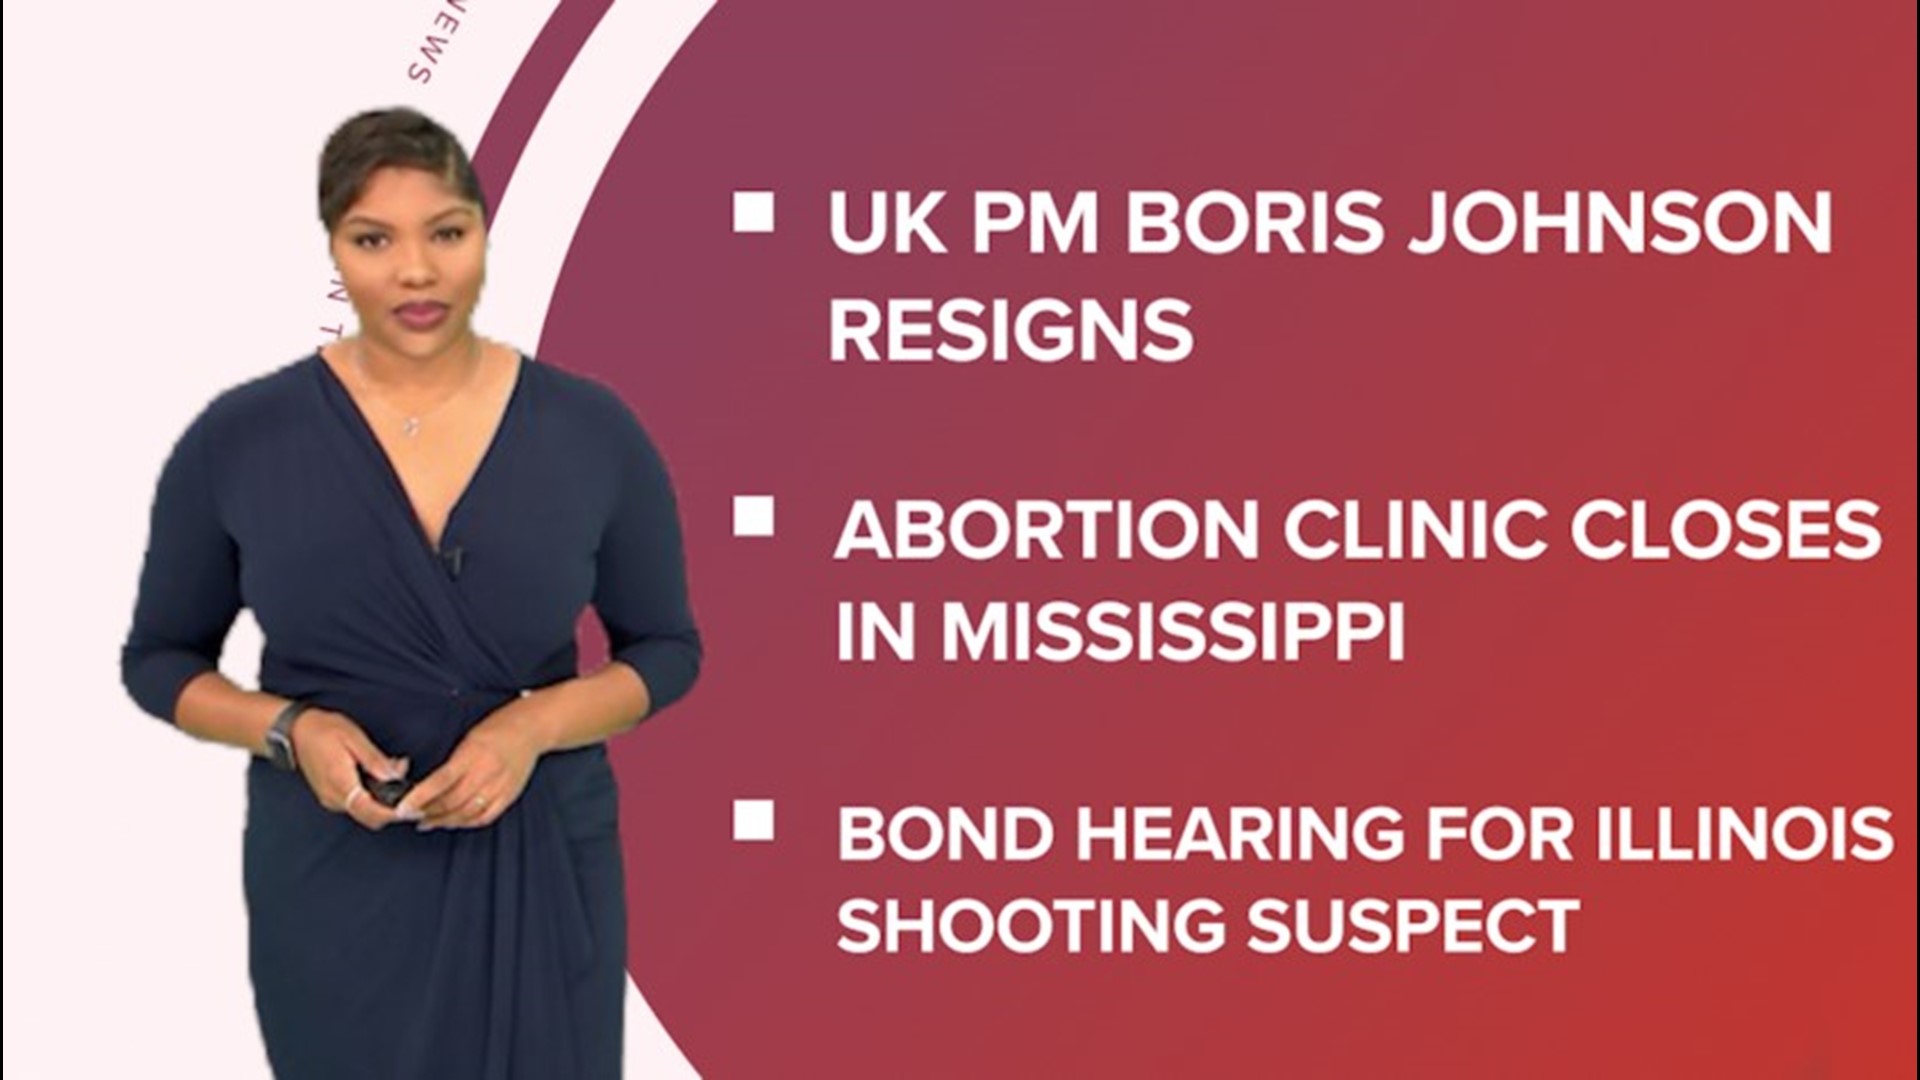 A look at what is happening across the world from UK PM Boris Johnson resigning, the last abortion clinic closing in Mississippi and the increased cost of childcare.